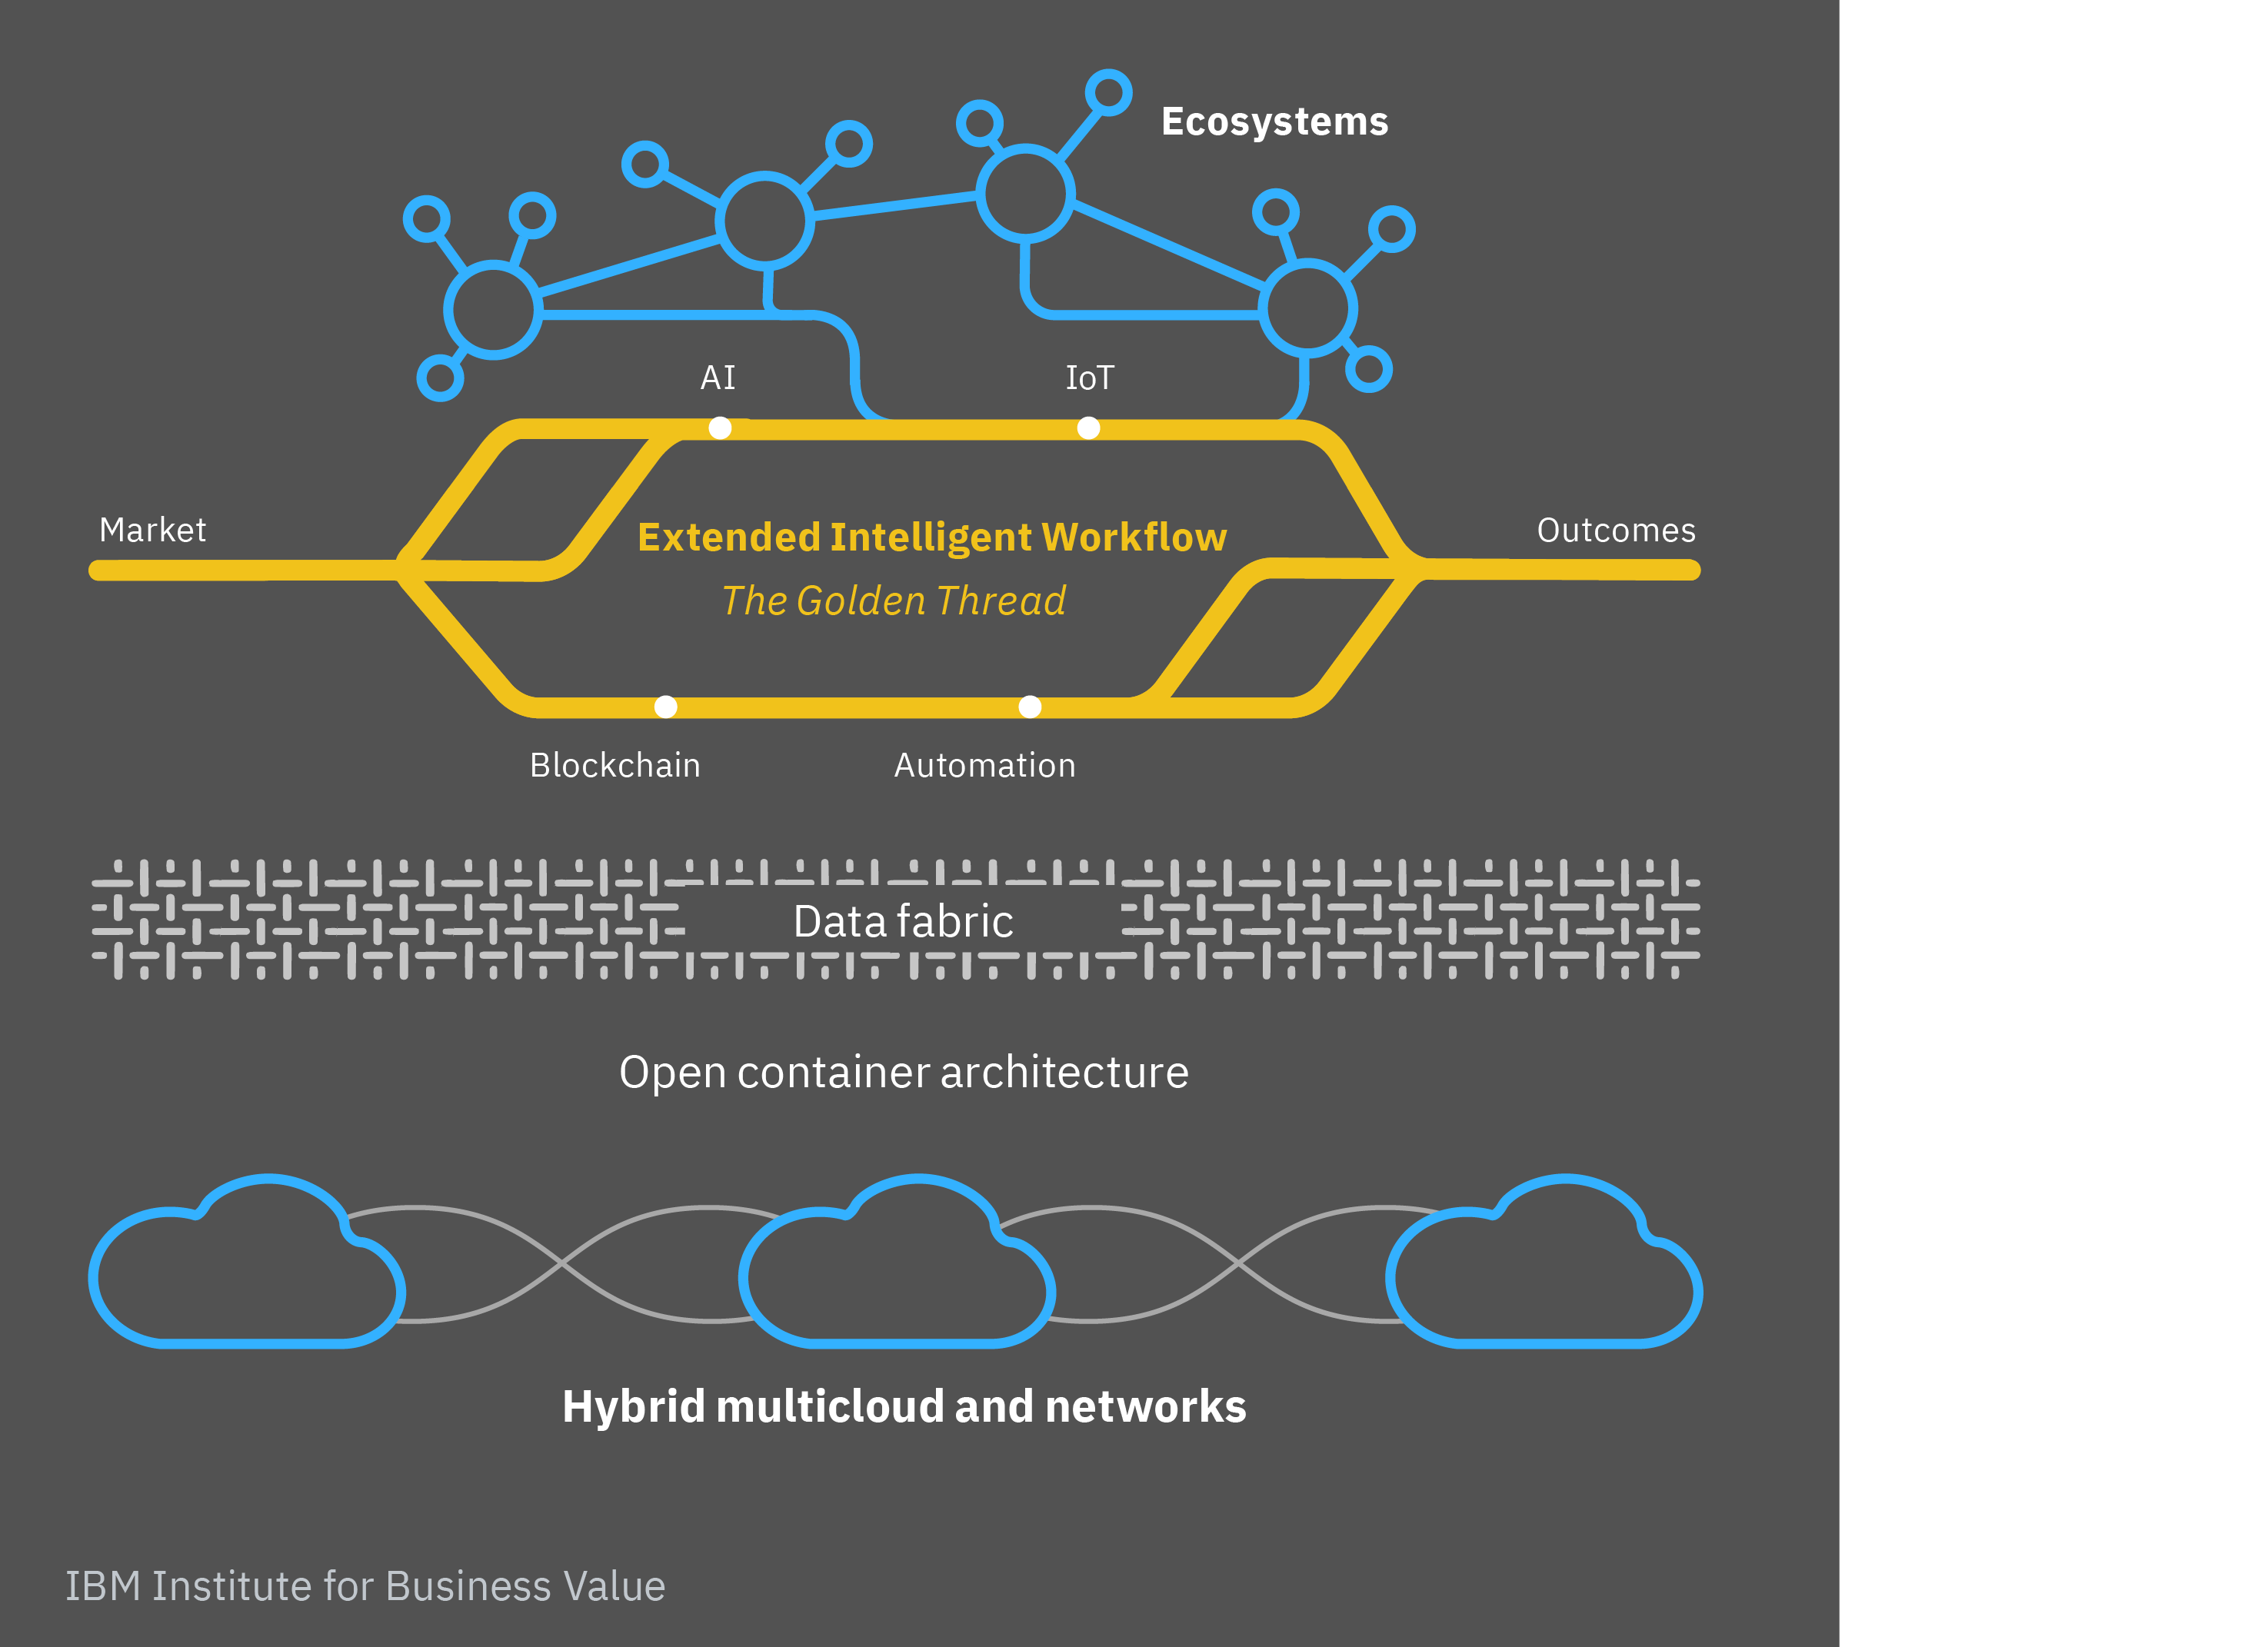 Open secure hybrid cloud and networks are foundational to the Virtual Enterprise